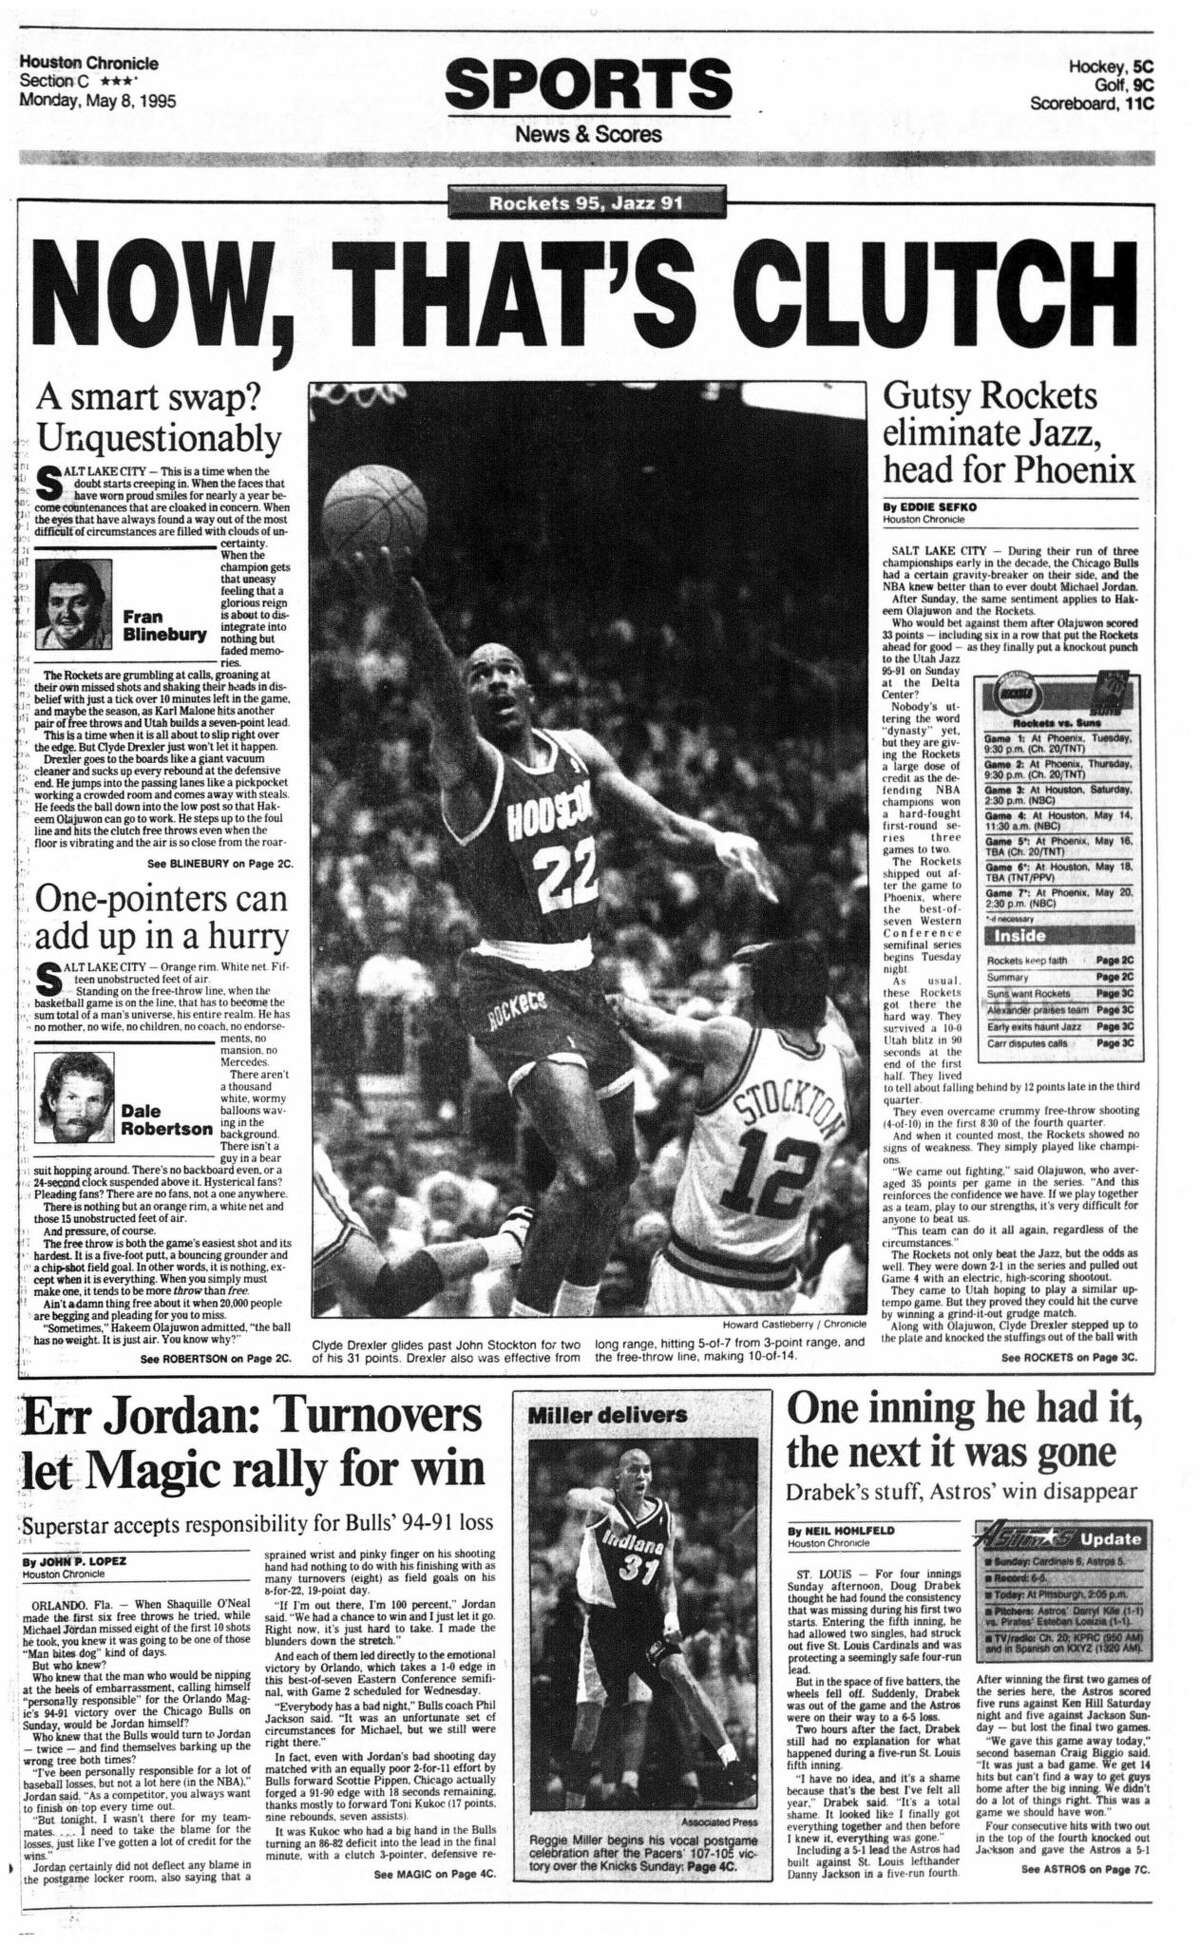 Today in playoff history: 1995 Rockets set 3-point record in Utah